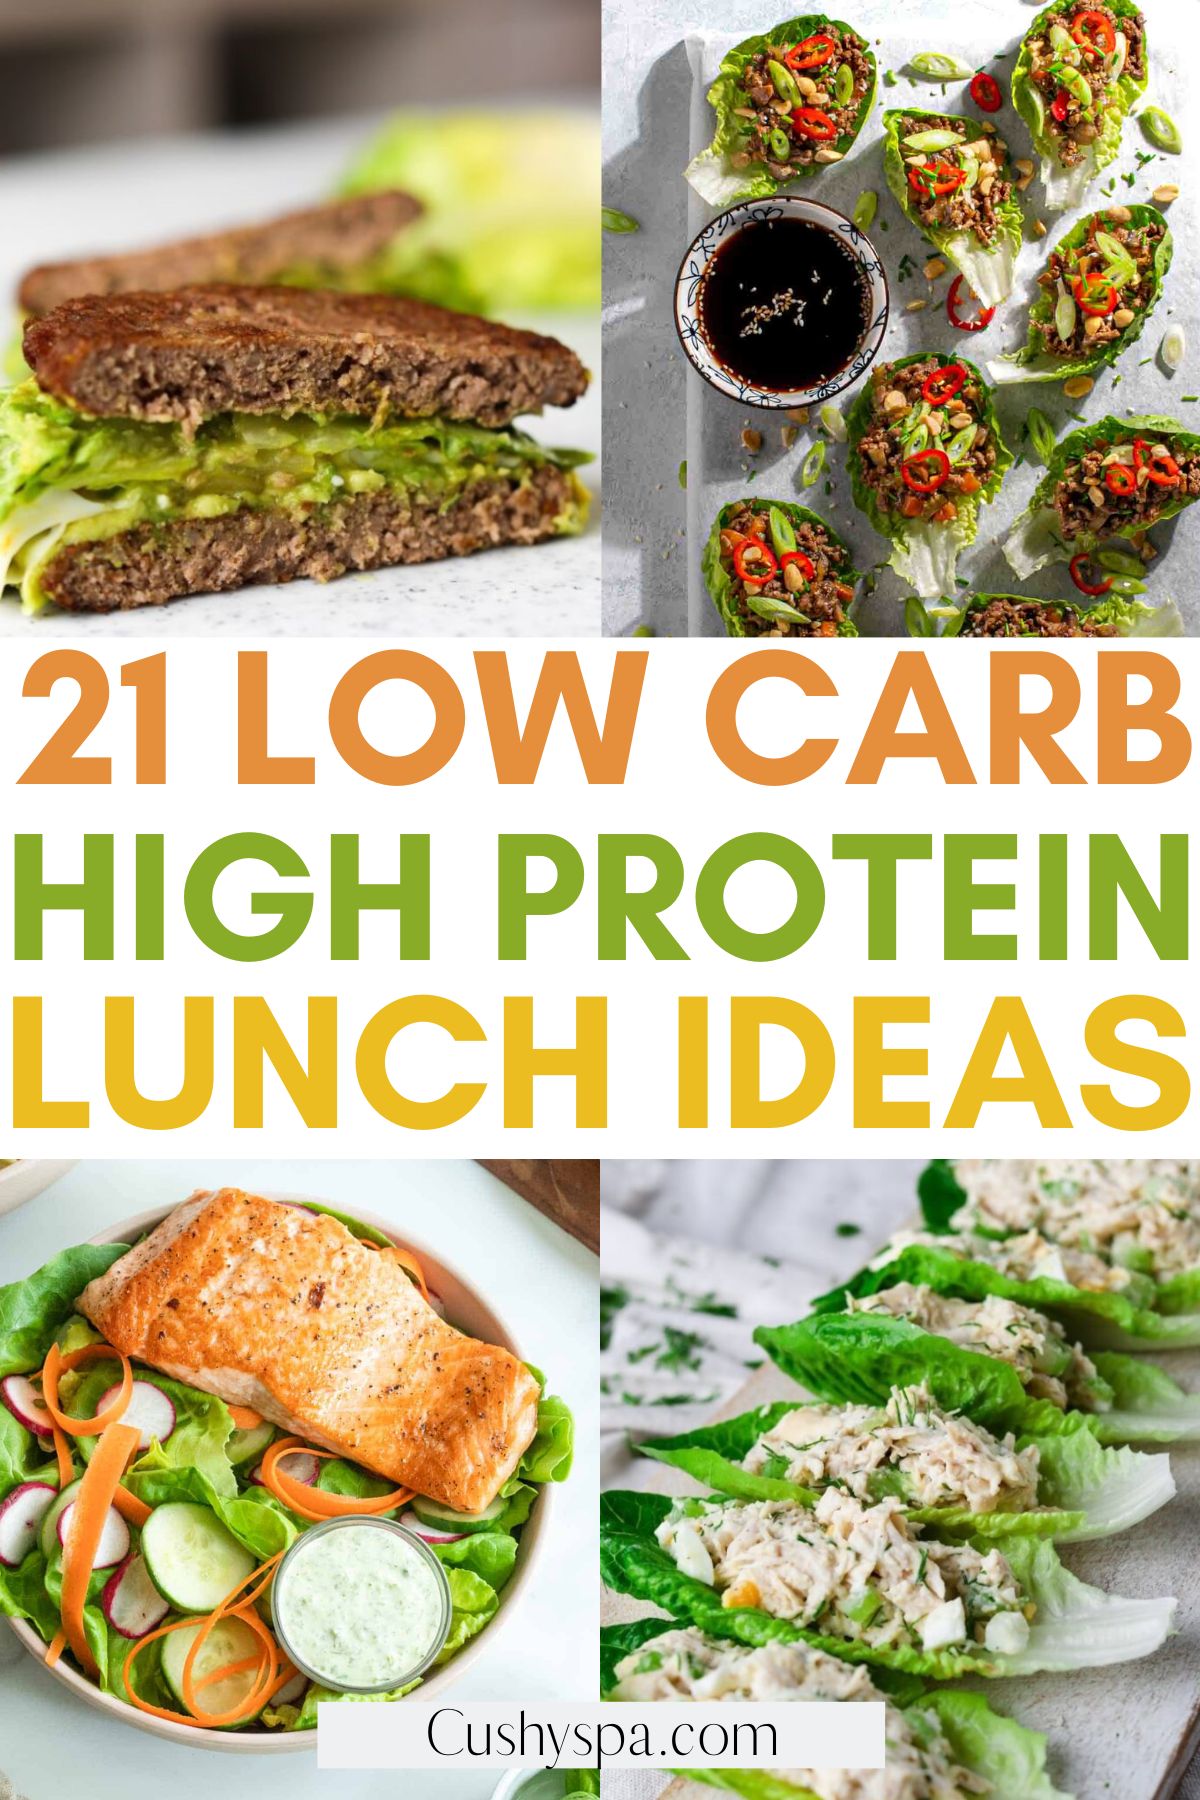 recipes for low carb high protein lunches